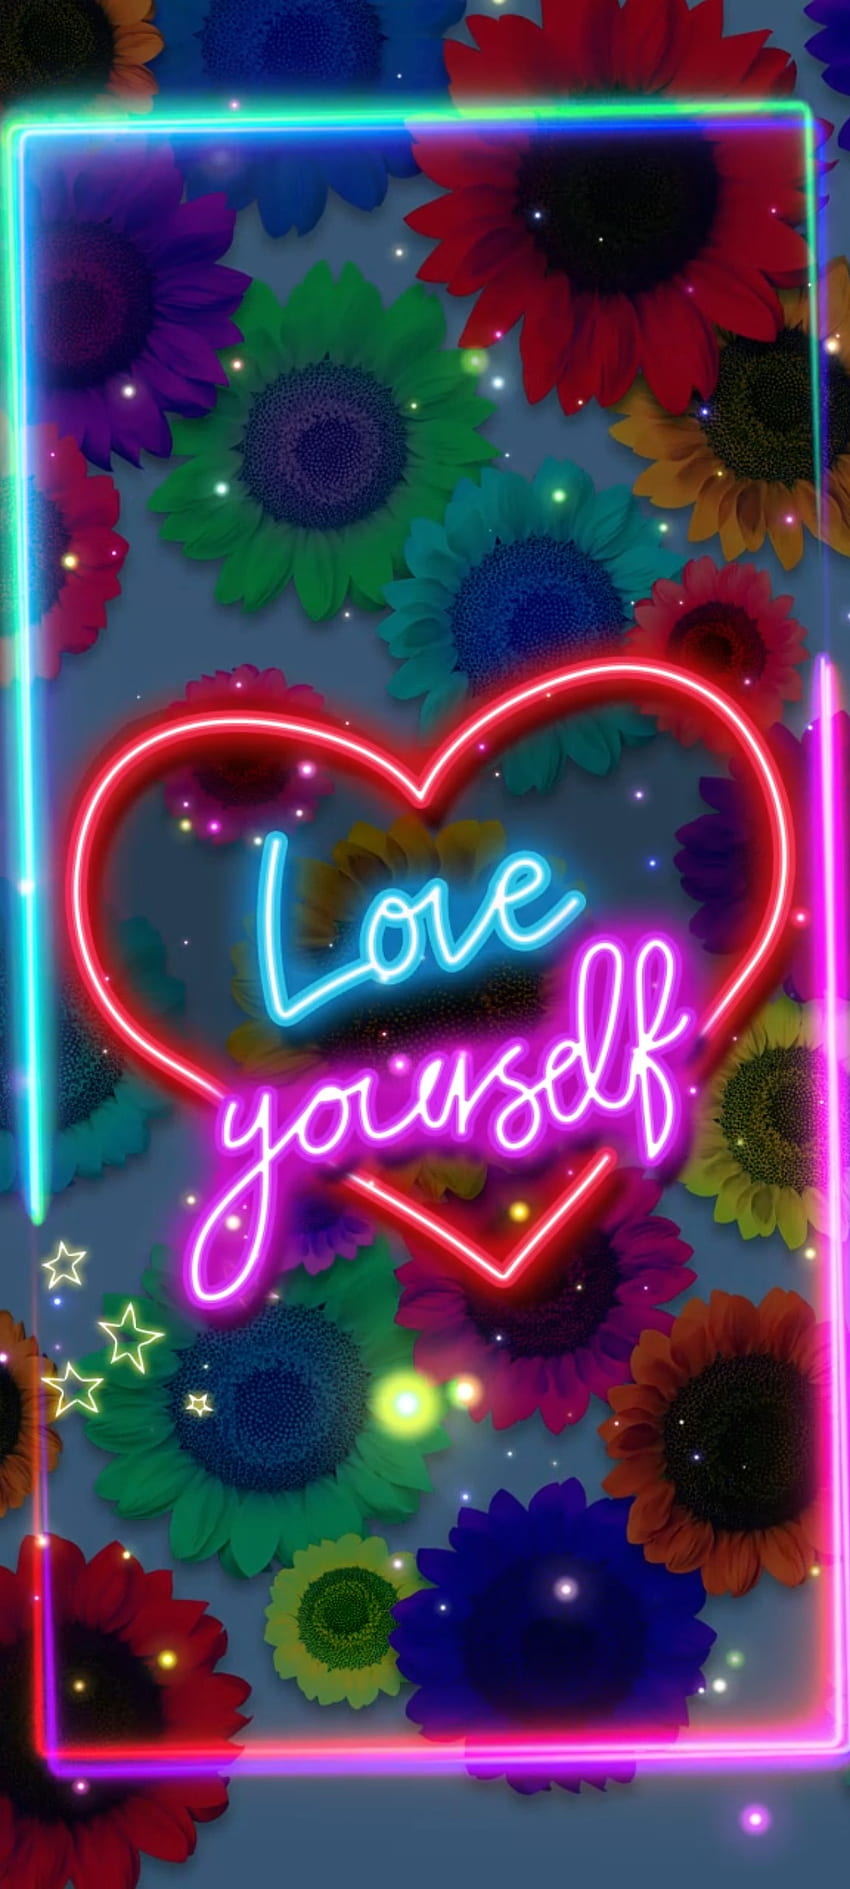 Love you Self, Heart, red, magenta, flowers, colorful HD phone wallpaper